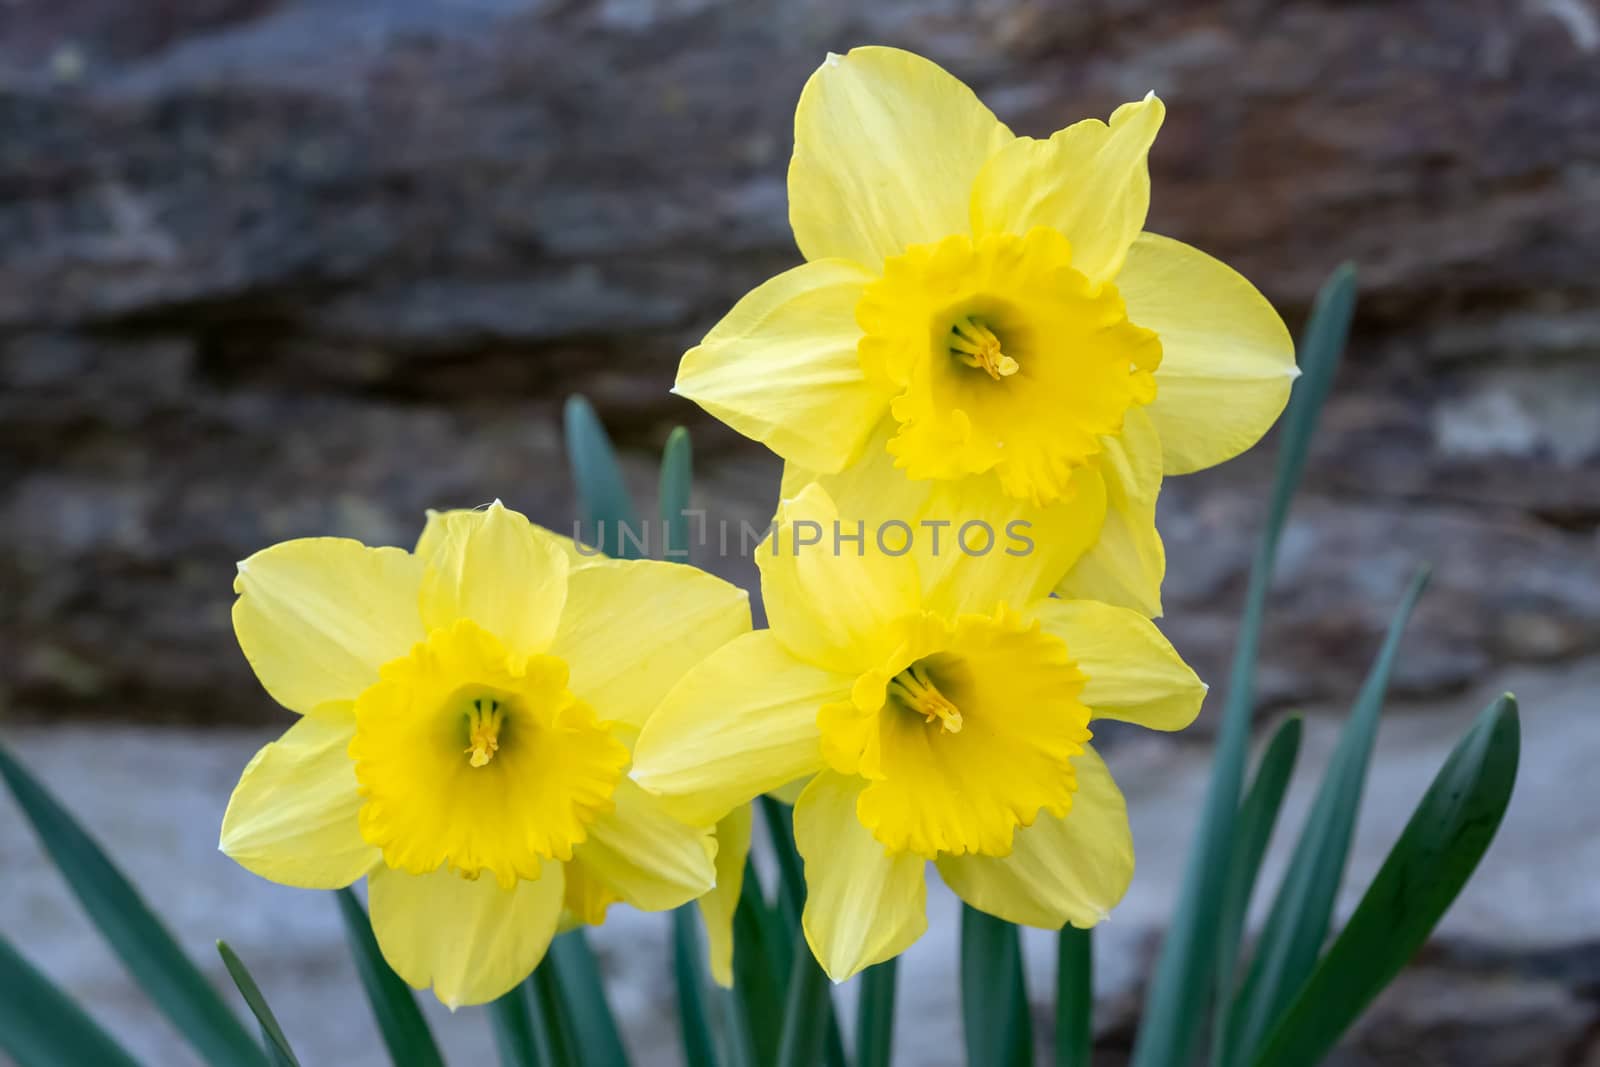 Three flower daffodils in spring outdoors